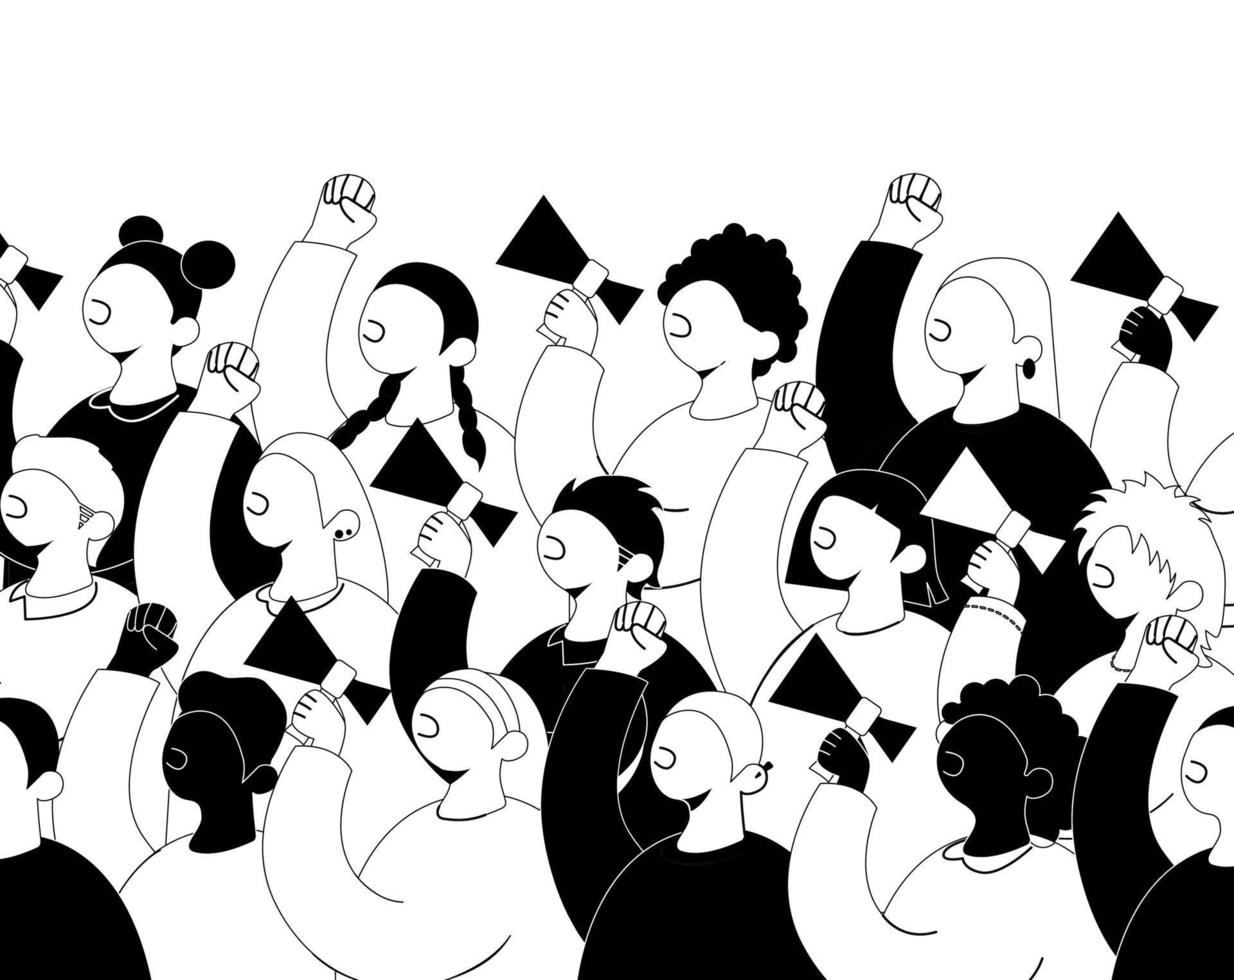 Crowd of protesters with fists in the air and megaphones at a demonstration. Black and white flat vector illustration